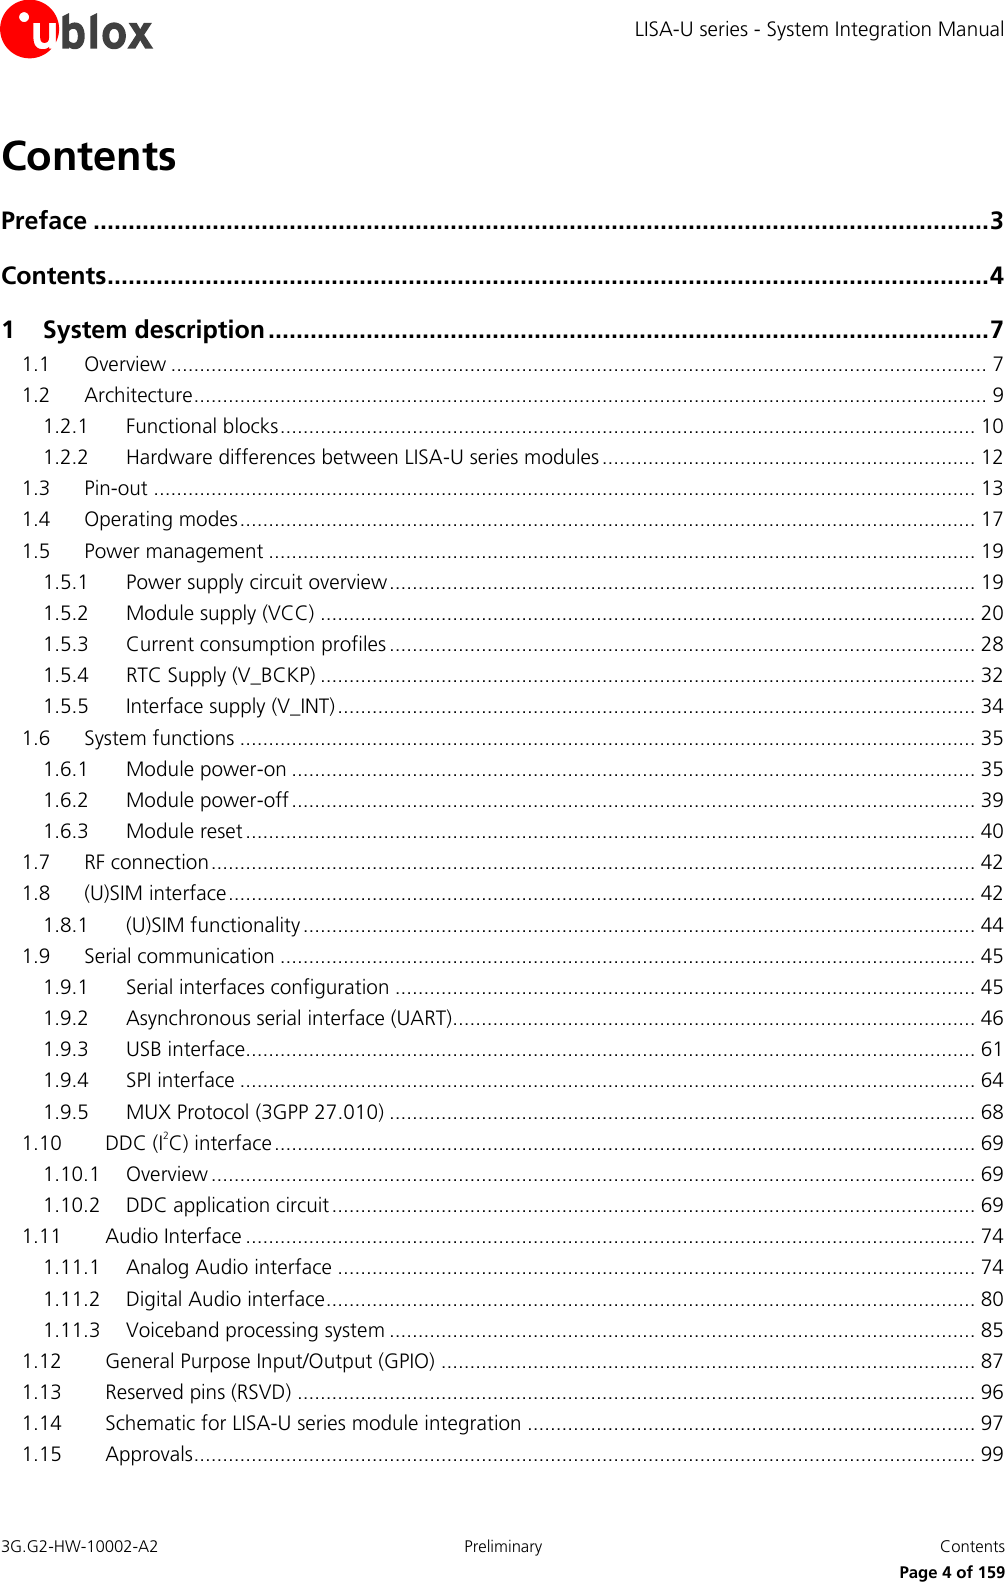 LISA-U series - System Integration Manual 3G.G2-HW-10002-A2  Preliminary  Contents      Page 4 of 159 Contents Preface ................................................................................................................................ 3 Contents .............................................................................................................................. 4 1 System description ....................................................................................................... 7 1.1 Overview .............................................................................................................................................. 7 1.2 Architecture .......................................................................................................................................... 9 1.2.1 Functional blocks ......................................................................................................................... 10 1.2.2 Hardware differences between LISA-U series modules ................................................................. 12 1.3 Pin-out ............................................................................................................................................... 13 1.4 Operating modes ................................................................................................................................ 17 1.5 Power management ........................................................................................................................... 19 1.5.1 Power supply circuit overview ...................................................................................................... 19 1.5.2 Module supply (VCC) .................................................................................................................. 20 1.5.3 Current consumption profiles ...................................................................................................... 28 1.5.4 RTC Supply (V_BCKP) .................................................................................................................. 32 1.5.5 Interface supply (V_INT) ............................................................................................................... 34 1.6 System functions ................................................................................................................................ 35 1.6.1 Module power-on ....................................................................................................................... 35 1.6.2 Module power-off ....................................................................................................................... 39 1.6.3 Module reset ............................................................................................................................... 40 1.7 RF connection ..................................................................................................................................... 42 1.8 (U)SIM interface .................................................................................................................................. 42 1.8.1 (U)SIM functionality ..................................................................................................................... 44 1.9 Serial communication ......................................................................................................................... 45 1.9.1 Serial interfaces configuration ..................................................................................................... 45 1.9.2 Asynchronous serial interface (UART)........................................................................................... 46 1.9.3 USB interface............................................................................................................................... 61 1.9.4 SPI interface ................................................................................................................................ 64 1.9.5 MUX Protocol (3GPP 27.010) ...................................................................................................... 68 1.10 DDC (I2C) interface .......................................................................................................................... 69 1.10.1 Overview ..................................................................................................................................... 69 1.10.2 DDC application circuit ................................................................................................................ 69 1.11 Audio Interface ............................................................................................................................... 74 1.11.1 Analog Audio interface ............................................................................................................... 74 1.11.2 Digital Audio interface ................................................................................................................. 80 1.11.3 Voiceband processing system ...................................................................................................... 85 1.12 General Purpose Input/Output (GPIO) ............................................................................................. 87 1.13 Reserved pins (RSVD) ...................................................................................................................... 96 1.14 Schematic for LISA-U series module integration .............................................................................. 97 1.15 Approvals ........................................................................................................................................ 99 